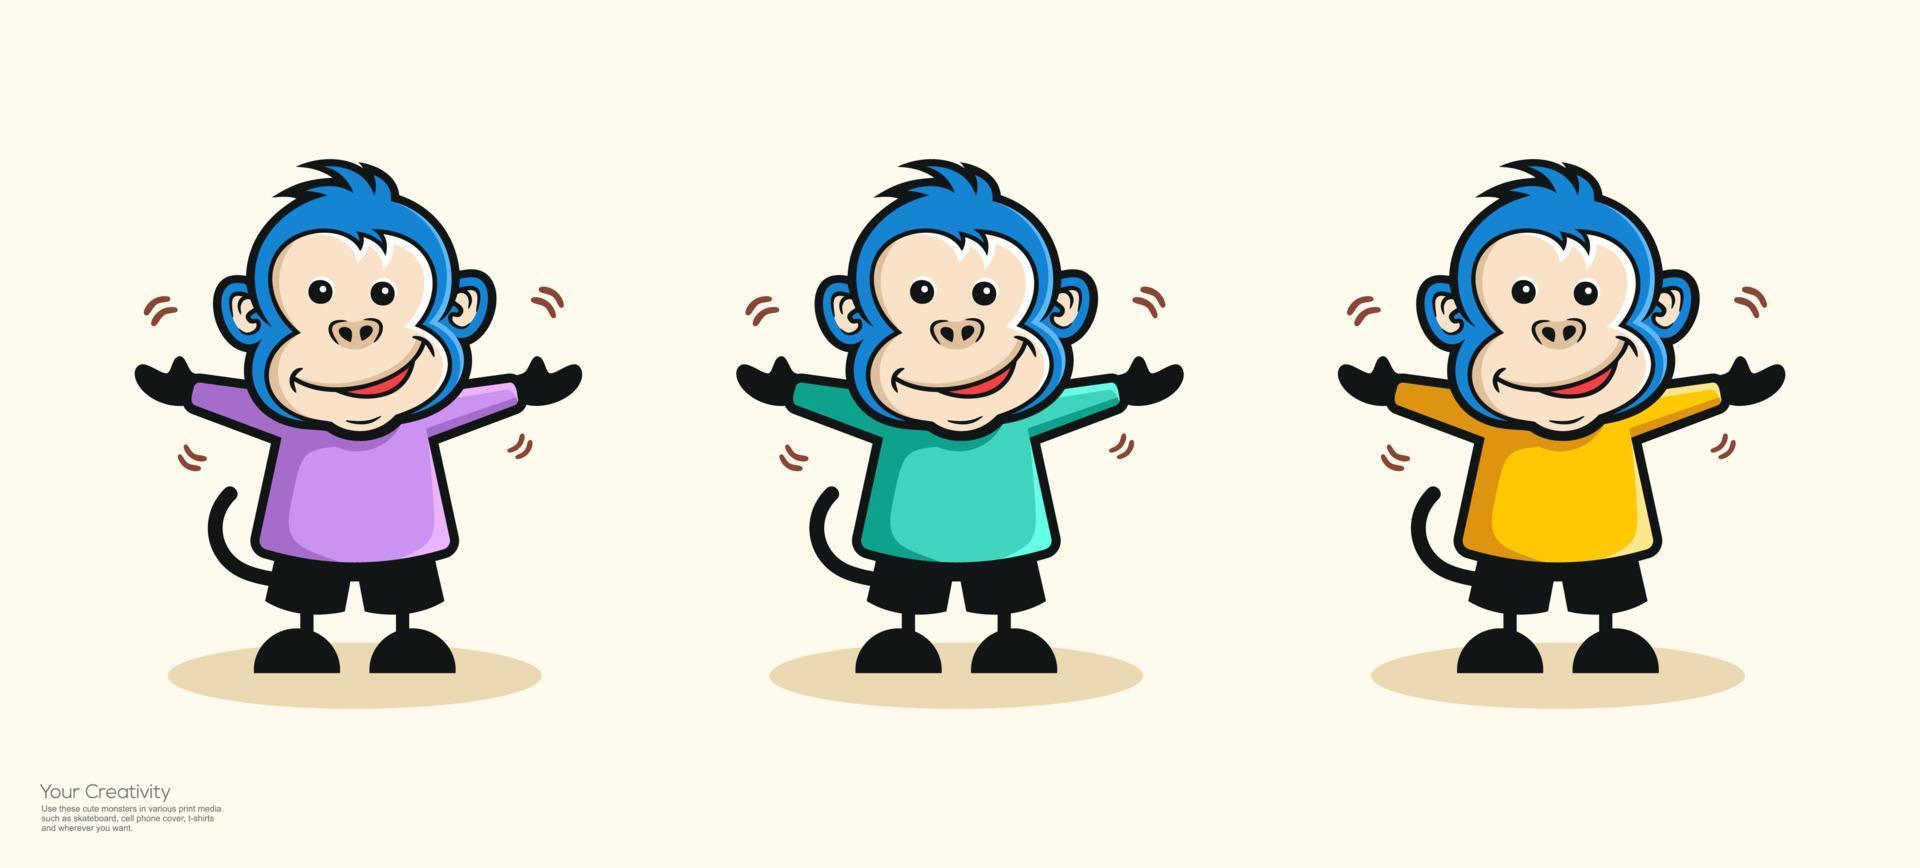 Vector illustration of a cute monkey character mascot design smiling